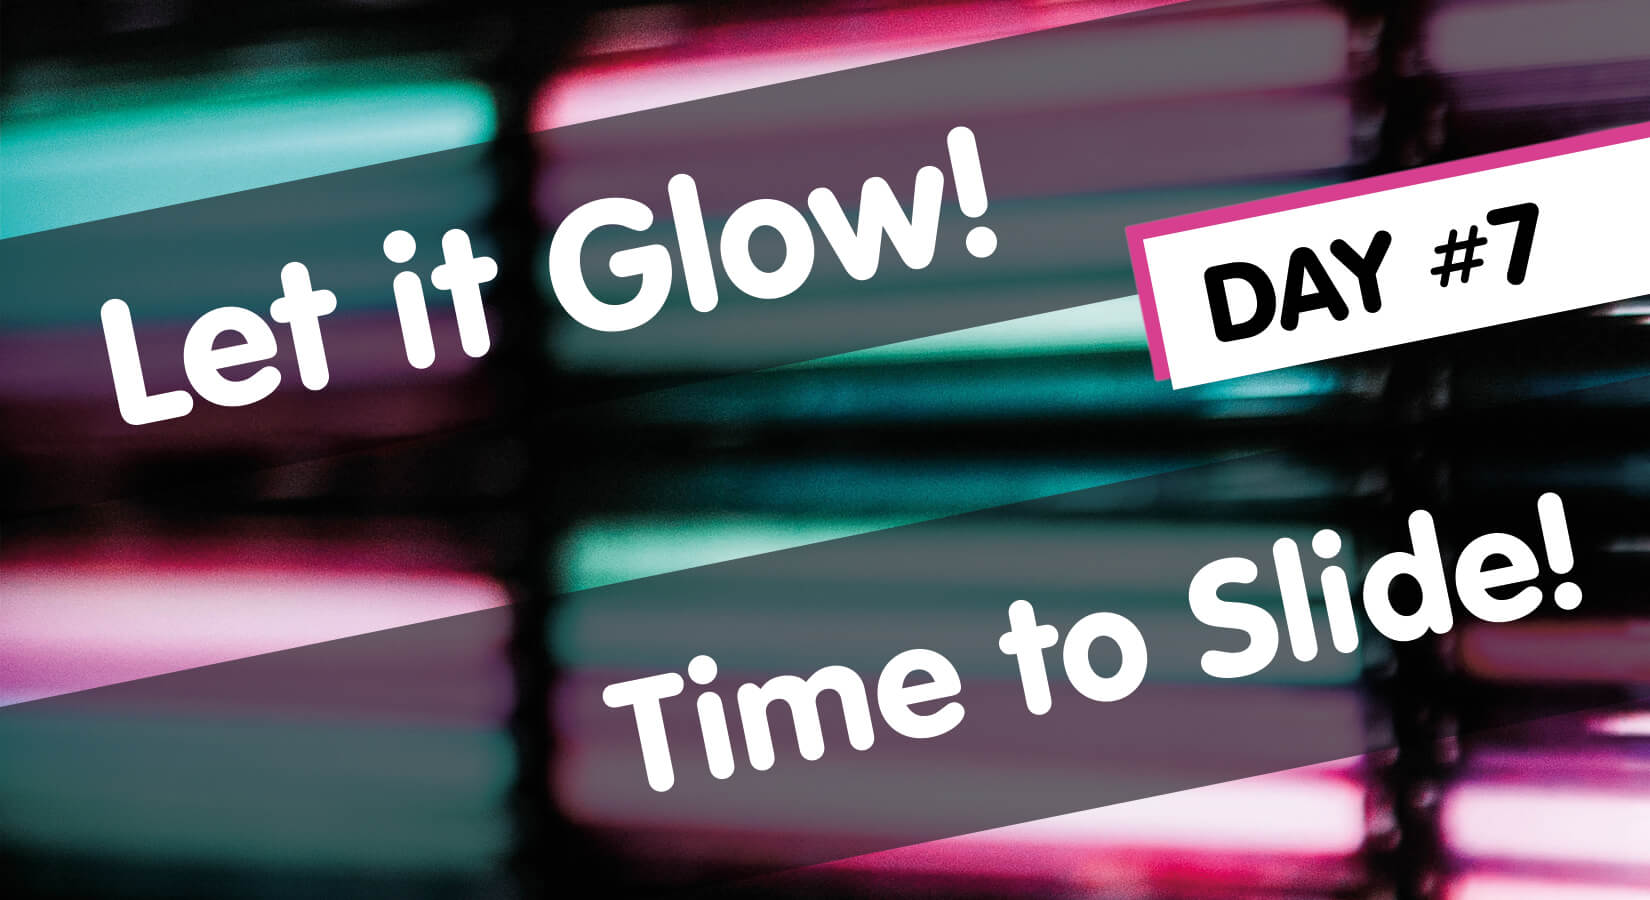 Let it Glow Maker Advent Calendar Day #7: Time to Slide!